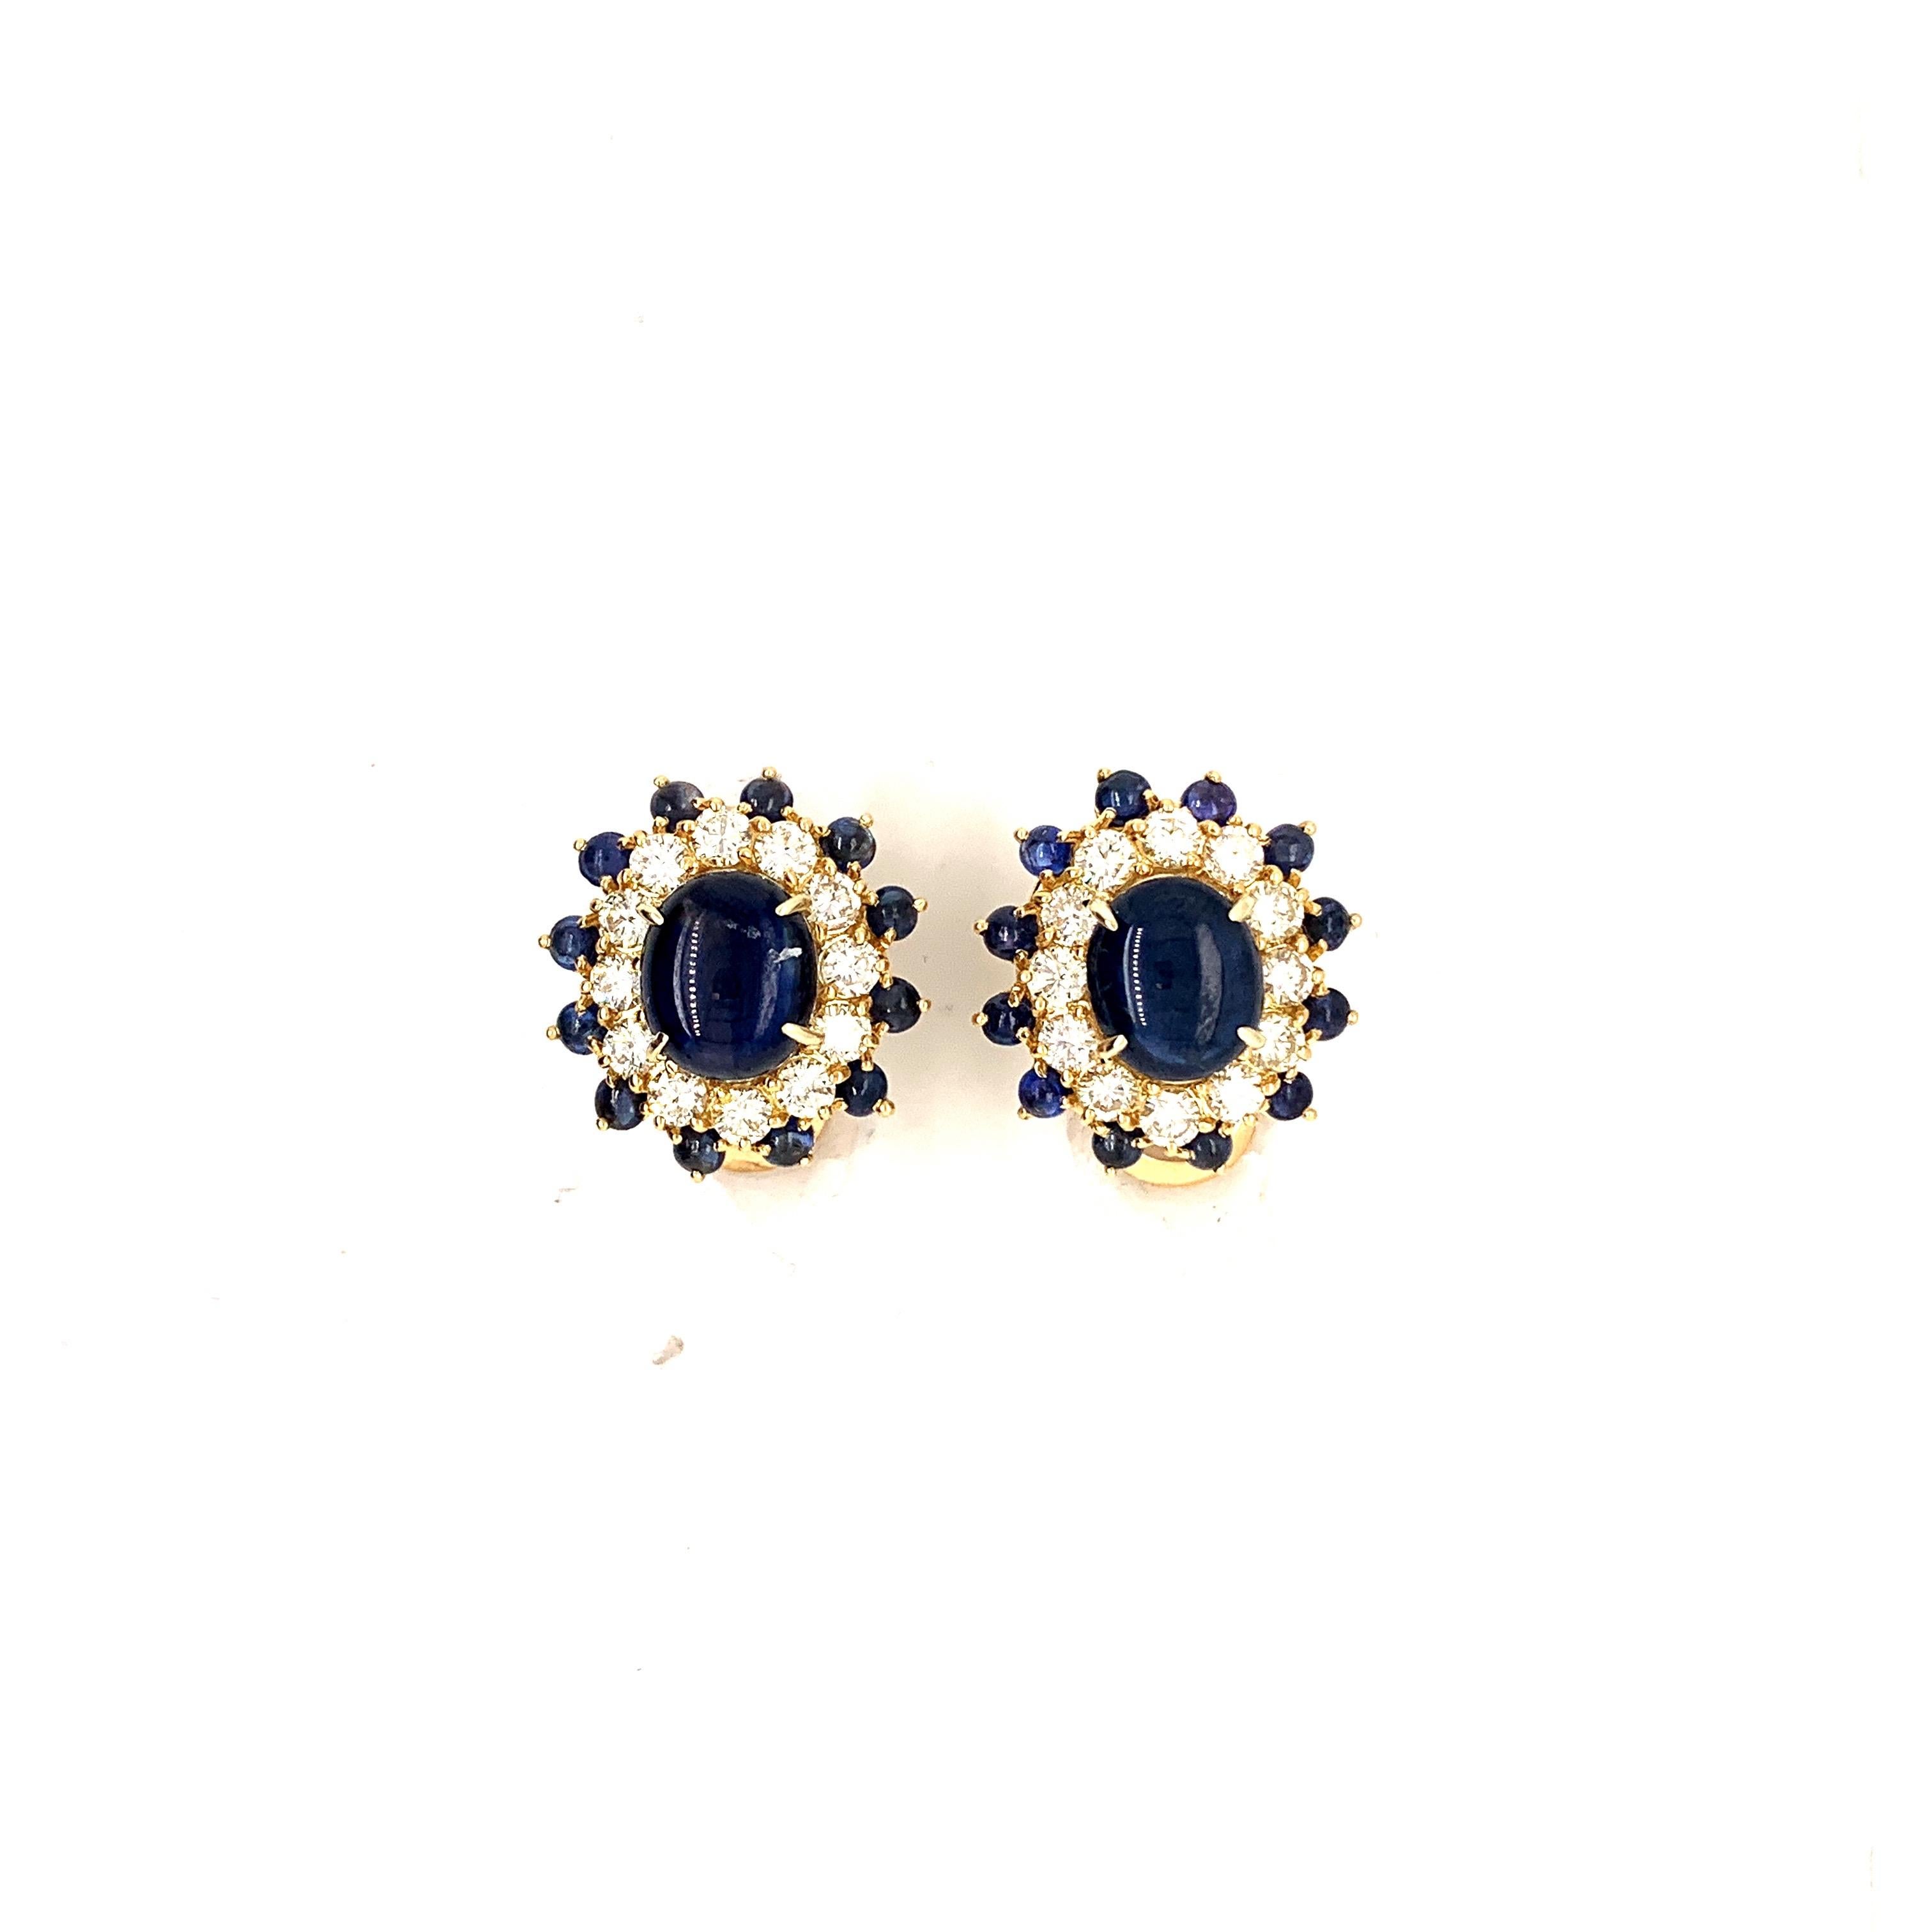 Royal like earrings featuring beautiful cabochon sapphires and Diamonds stunningly set in 14k Gold. These earrings clips are made to accommodate those without piercings.
Absolutely stunning, exceptionally priced!!

Viewings available in our NYC